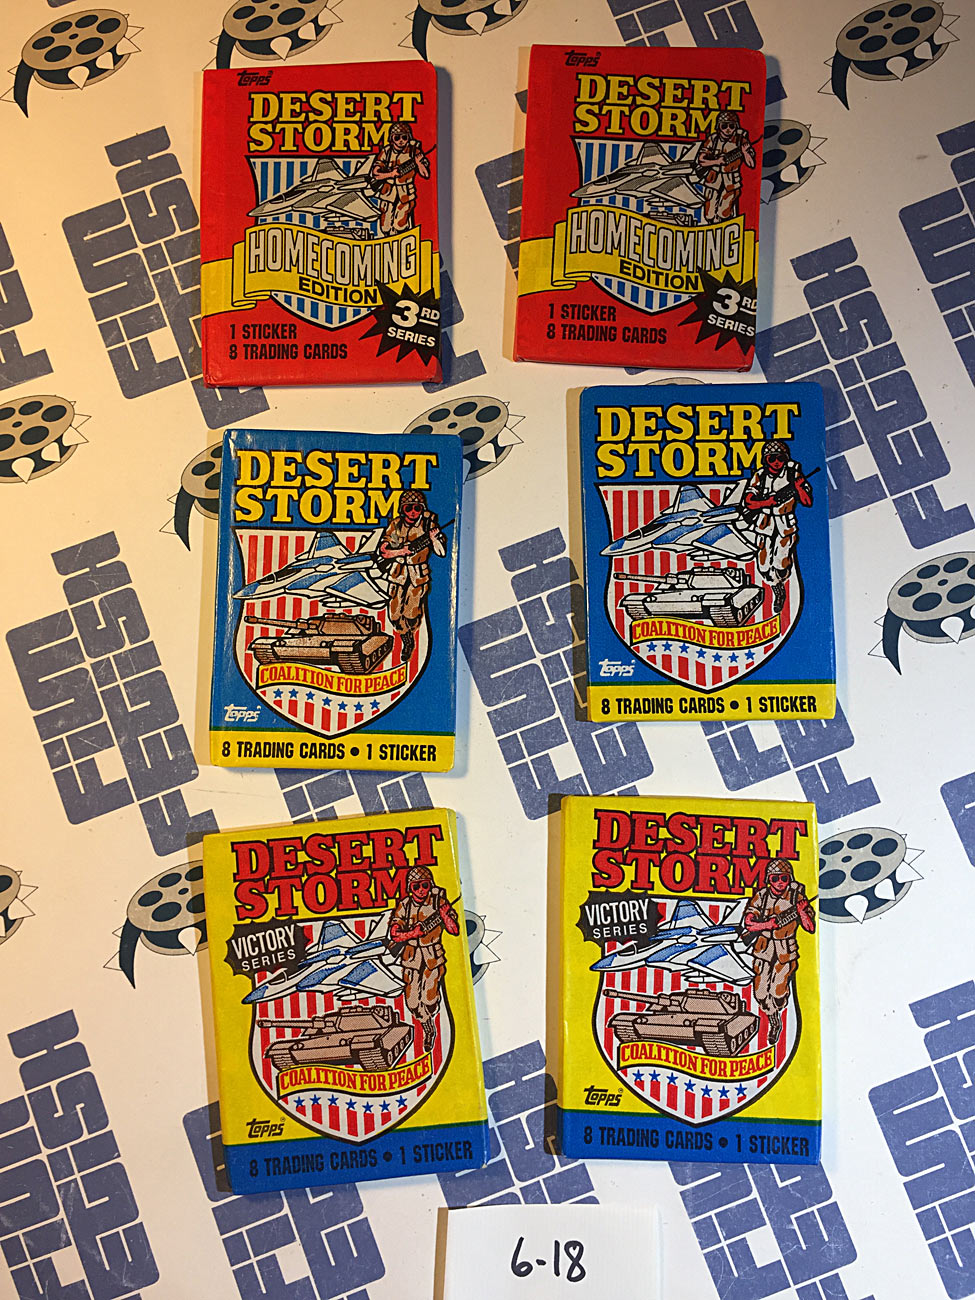 Set of 6 Sealed Topps Desert Storm Trading Card Wax Packs, Homecoming, Coalition For Peace, Victory Series [618]